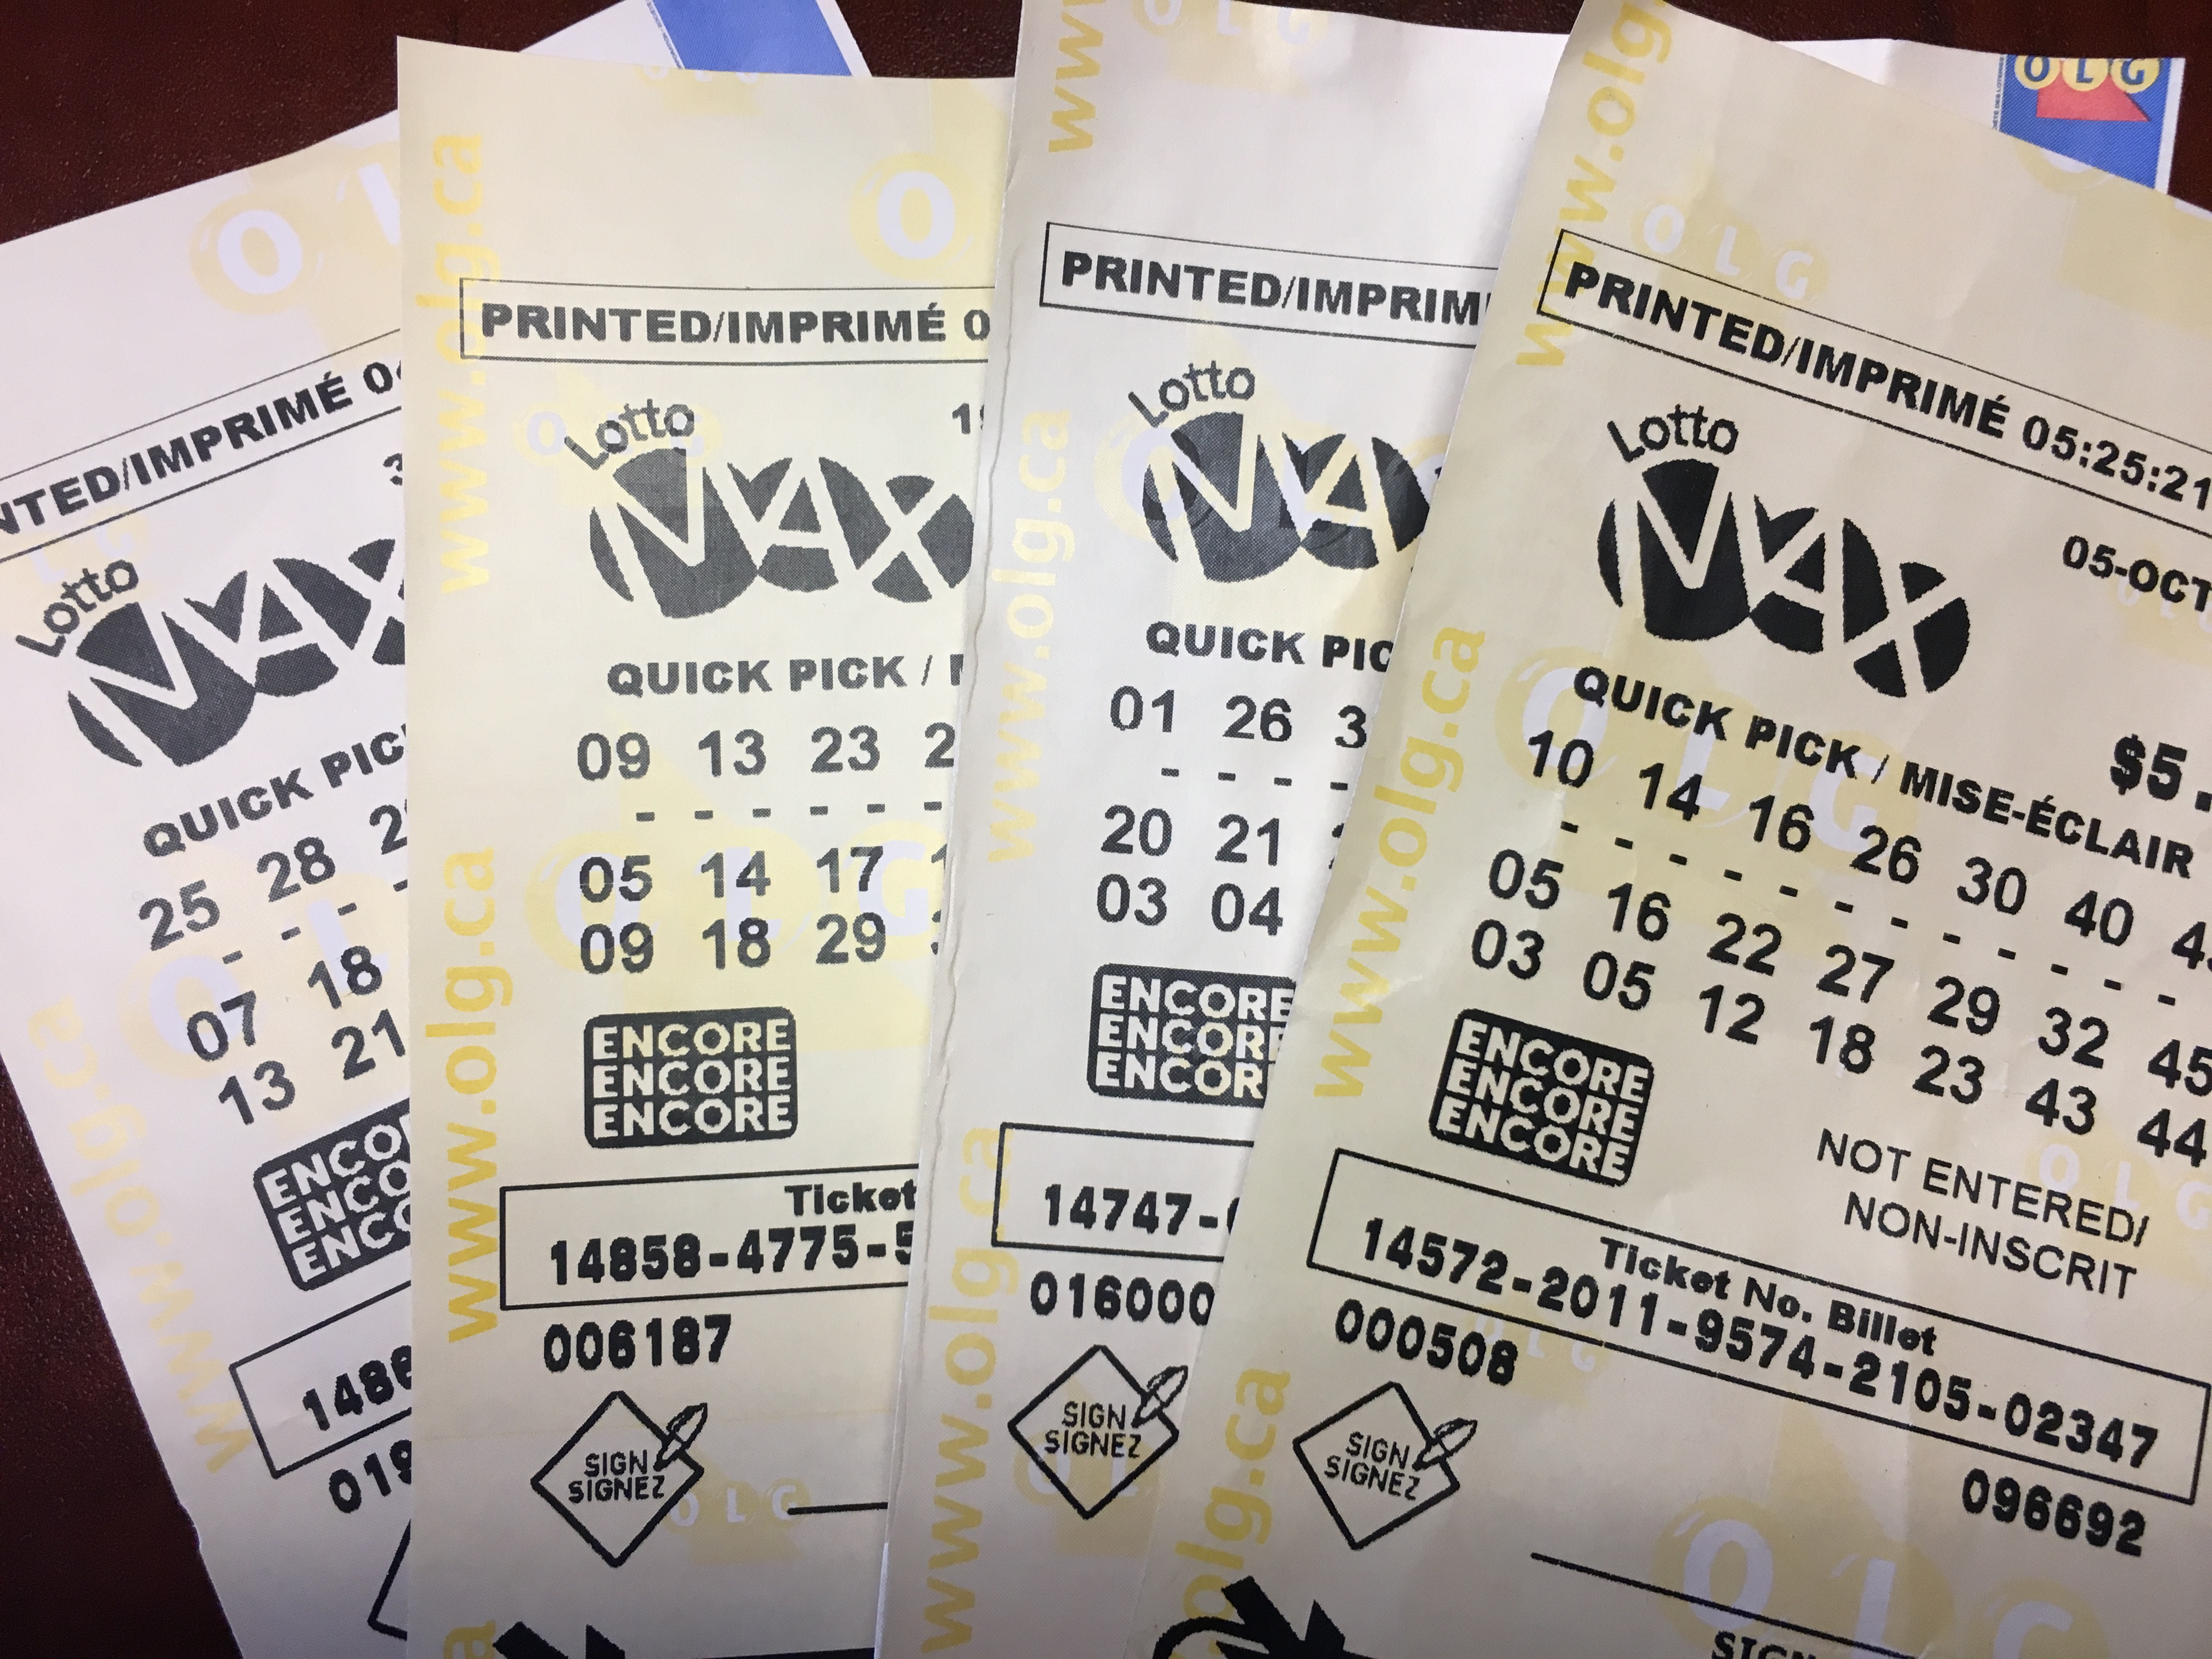 there was a winning ticket sold in huron county